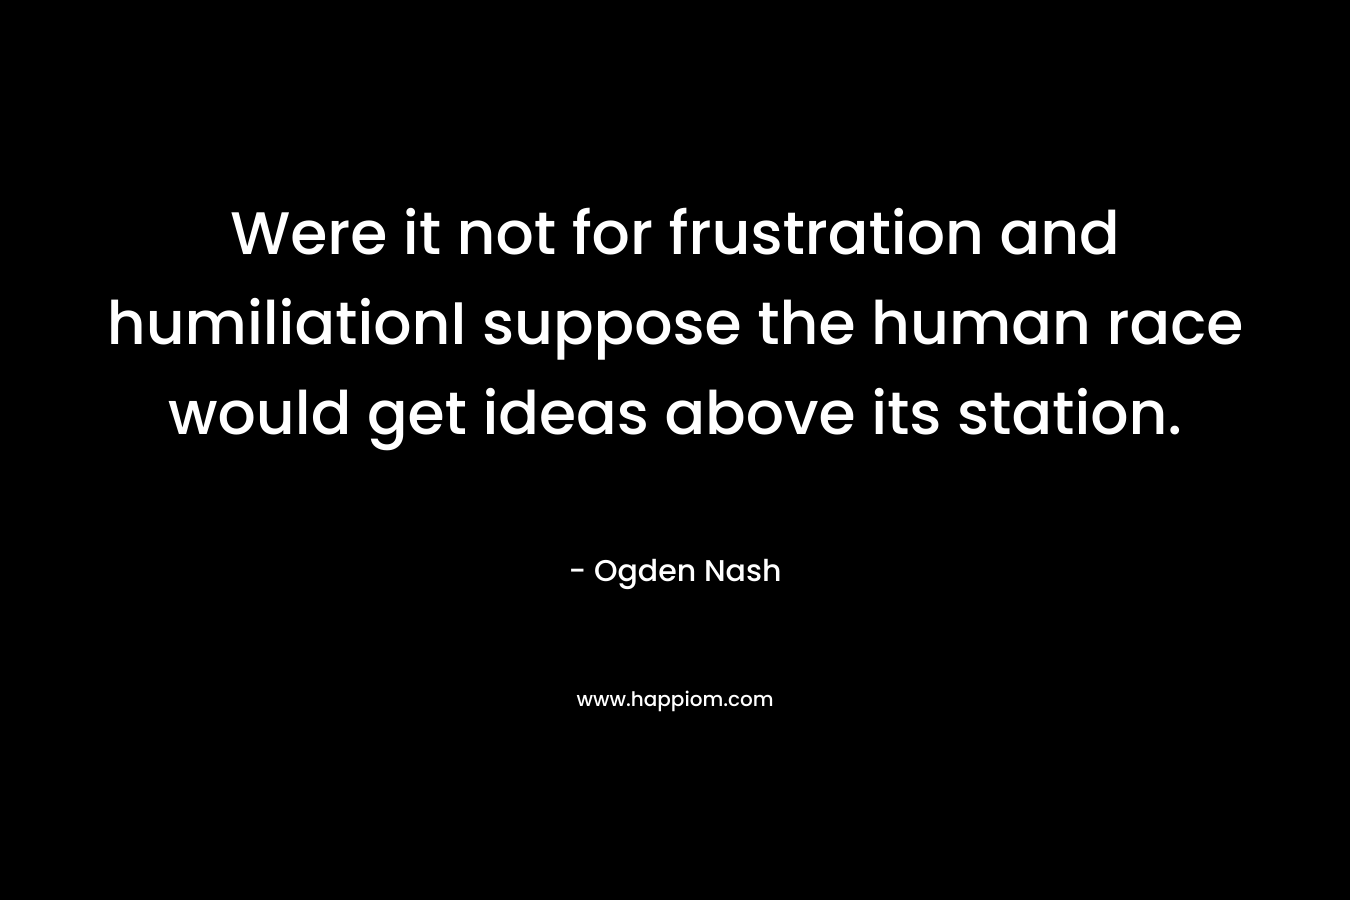 Were it not for frustration and humiliationI suppose the human race would get ideas above its station. – Ogden Nash